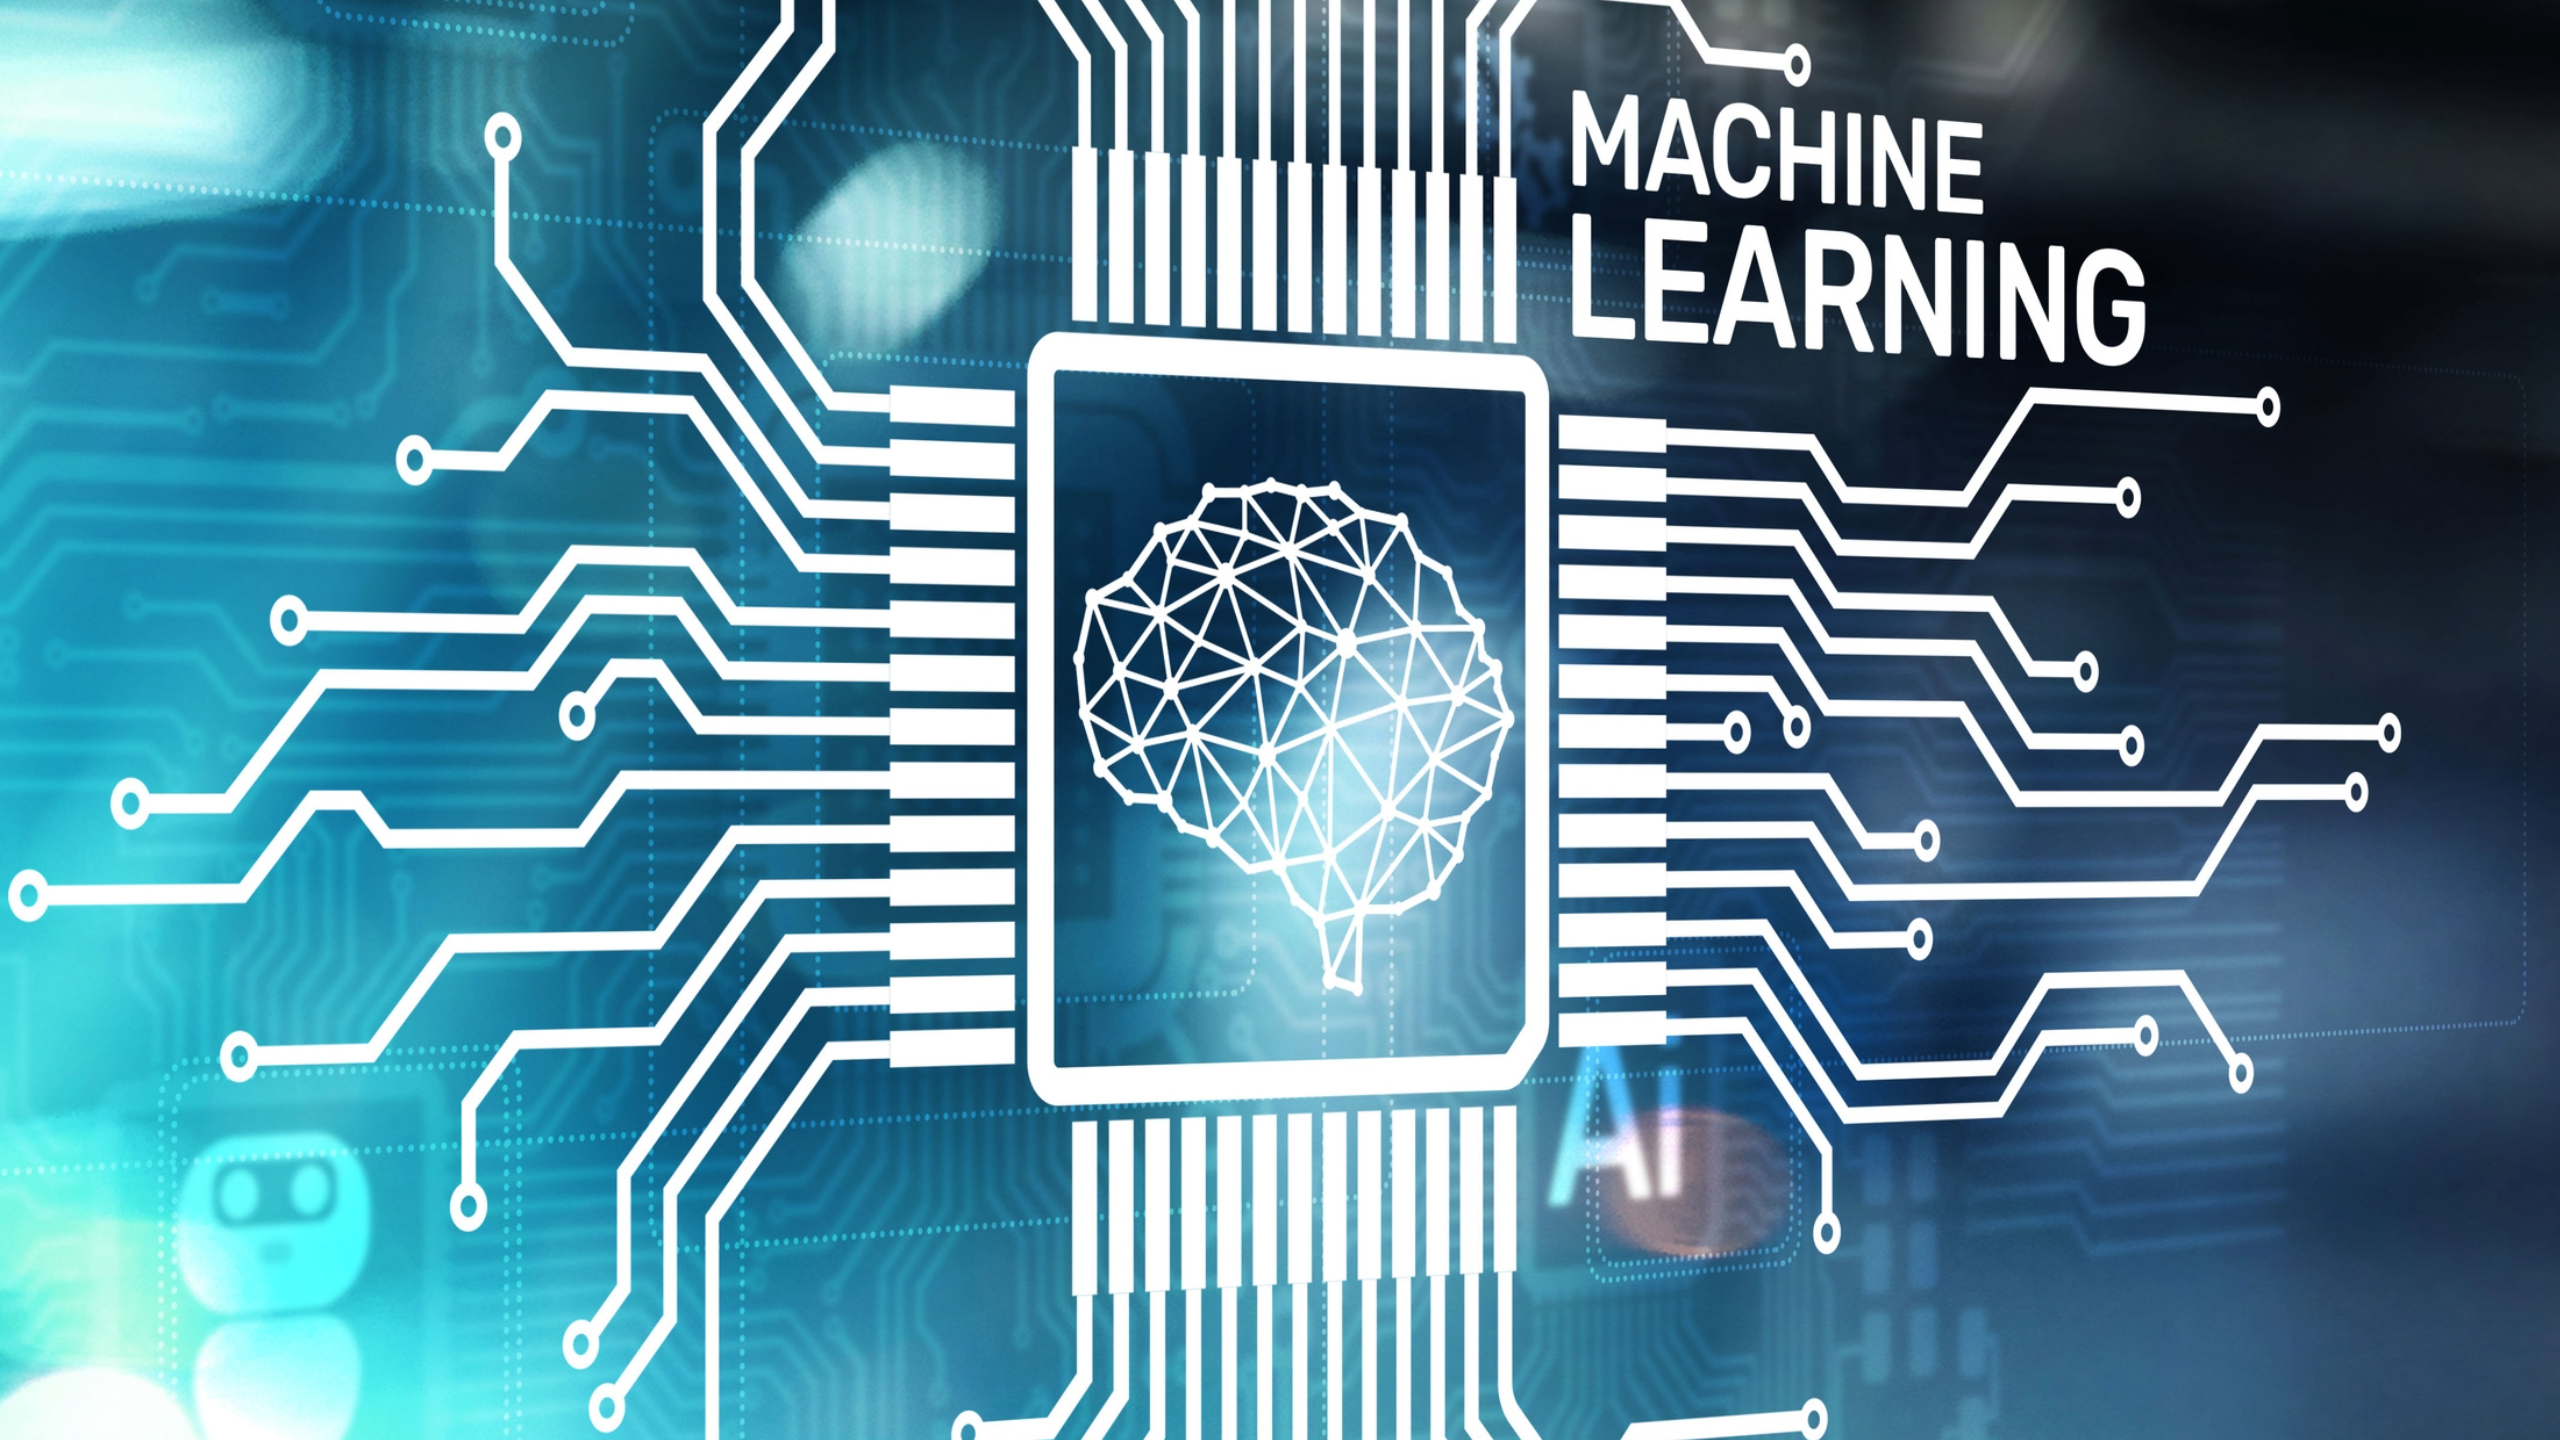 image features the words "Machine Learning" and has some computer chip images around a brain in the middle to signify machine learning